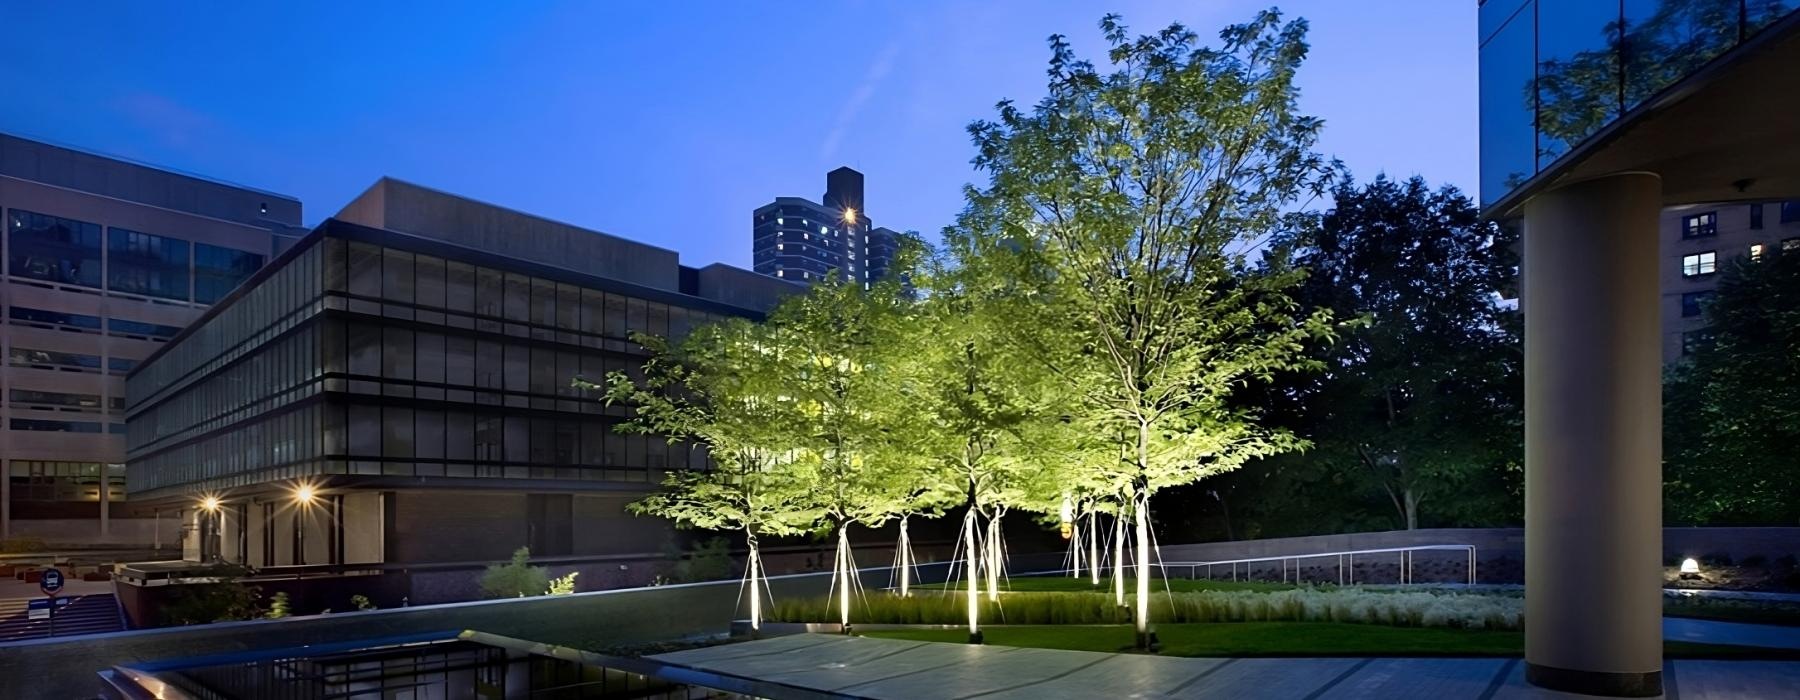 a man-made pond in a courtyard with trees and buildings in the background